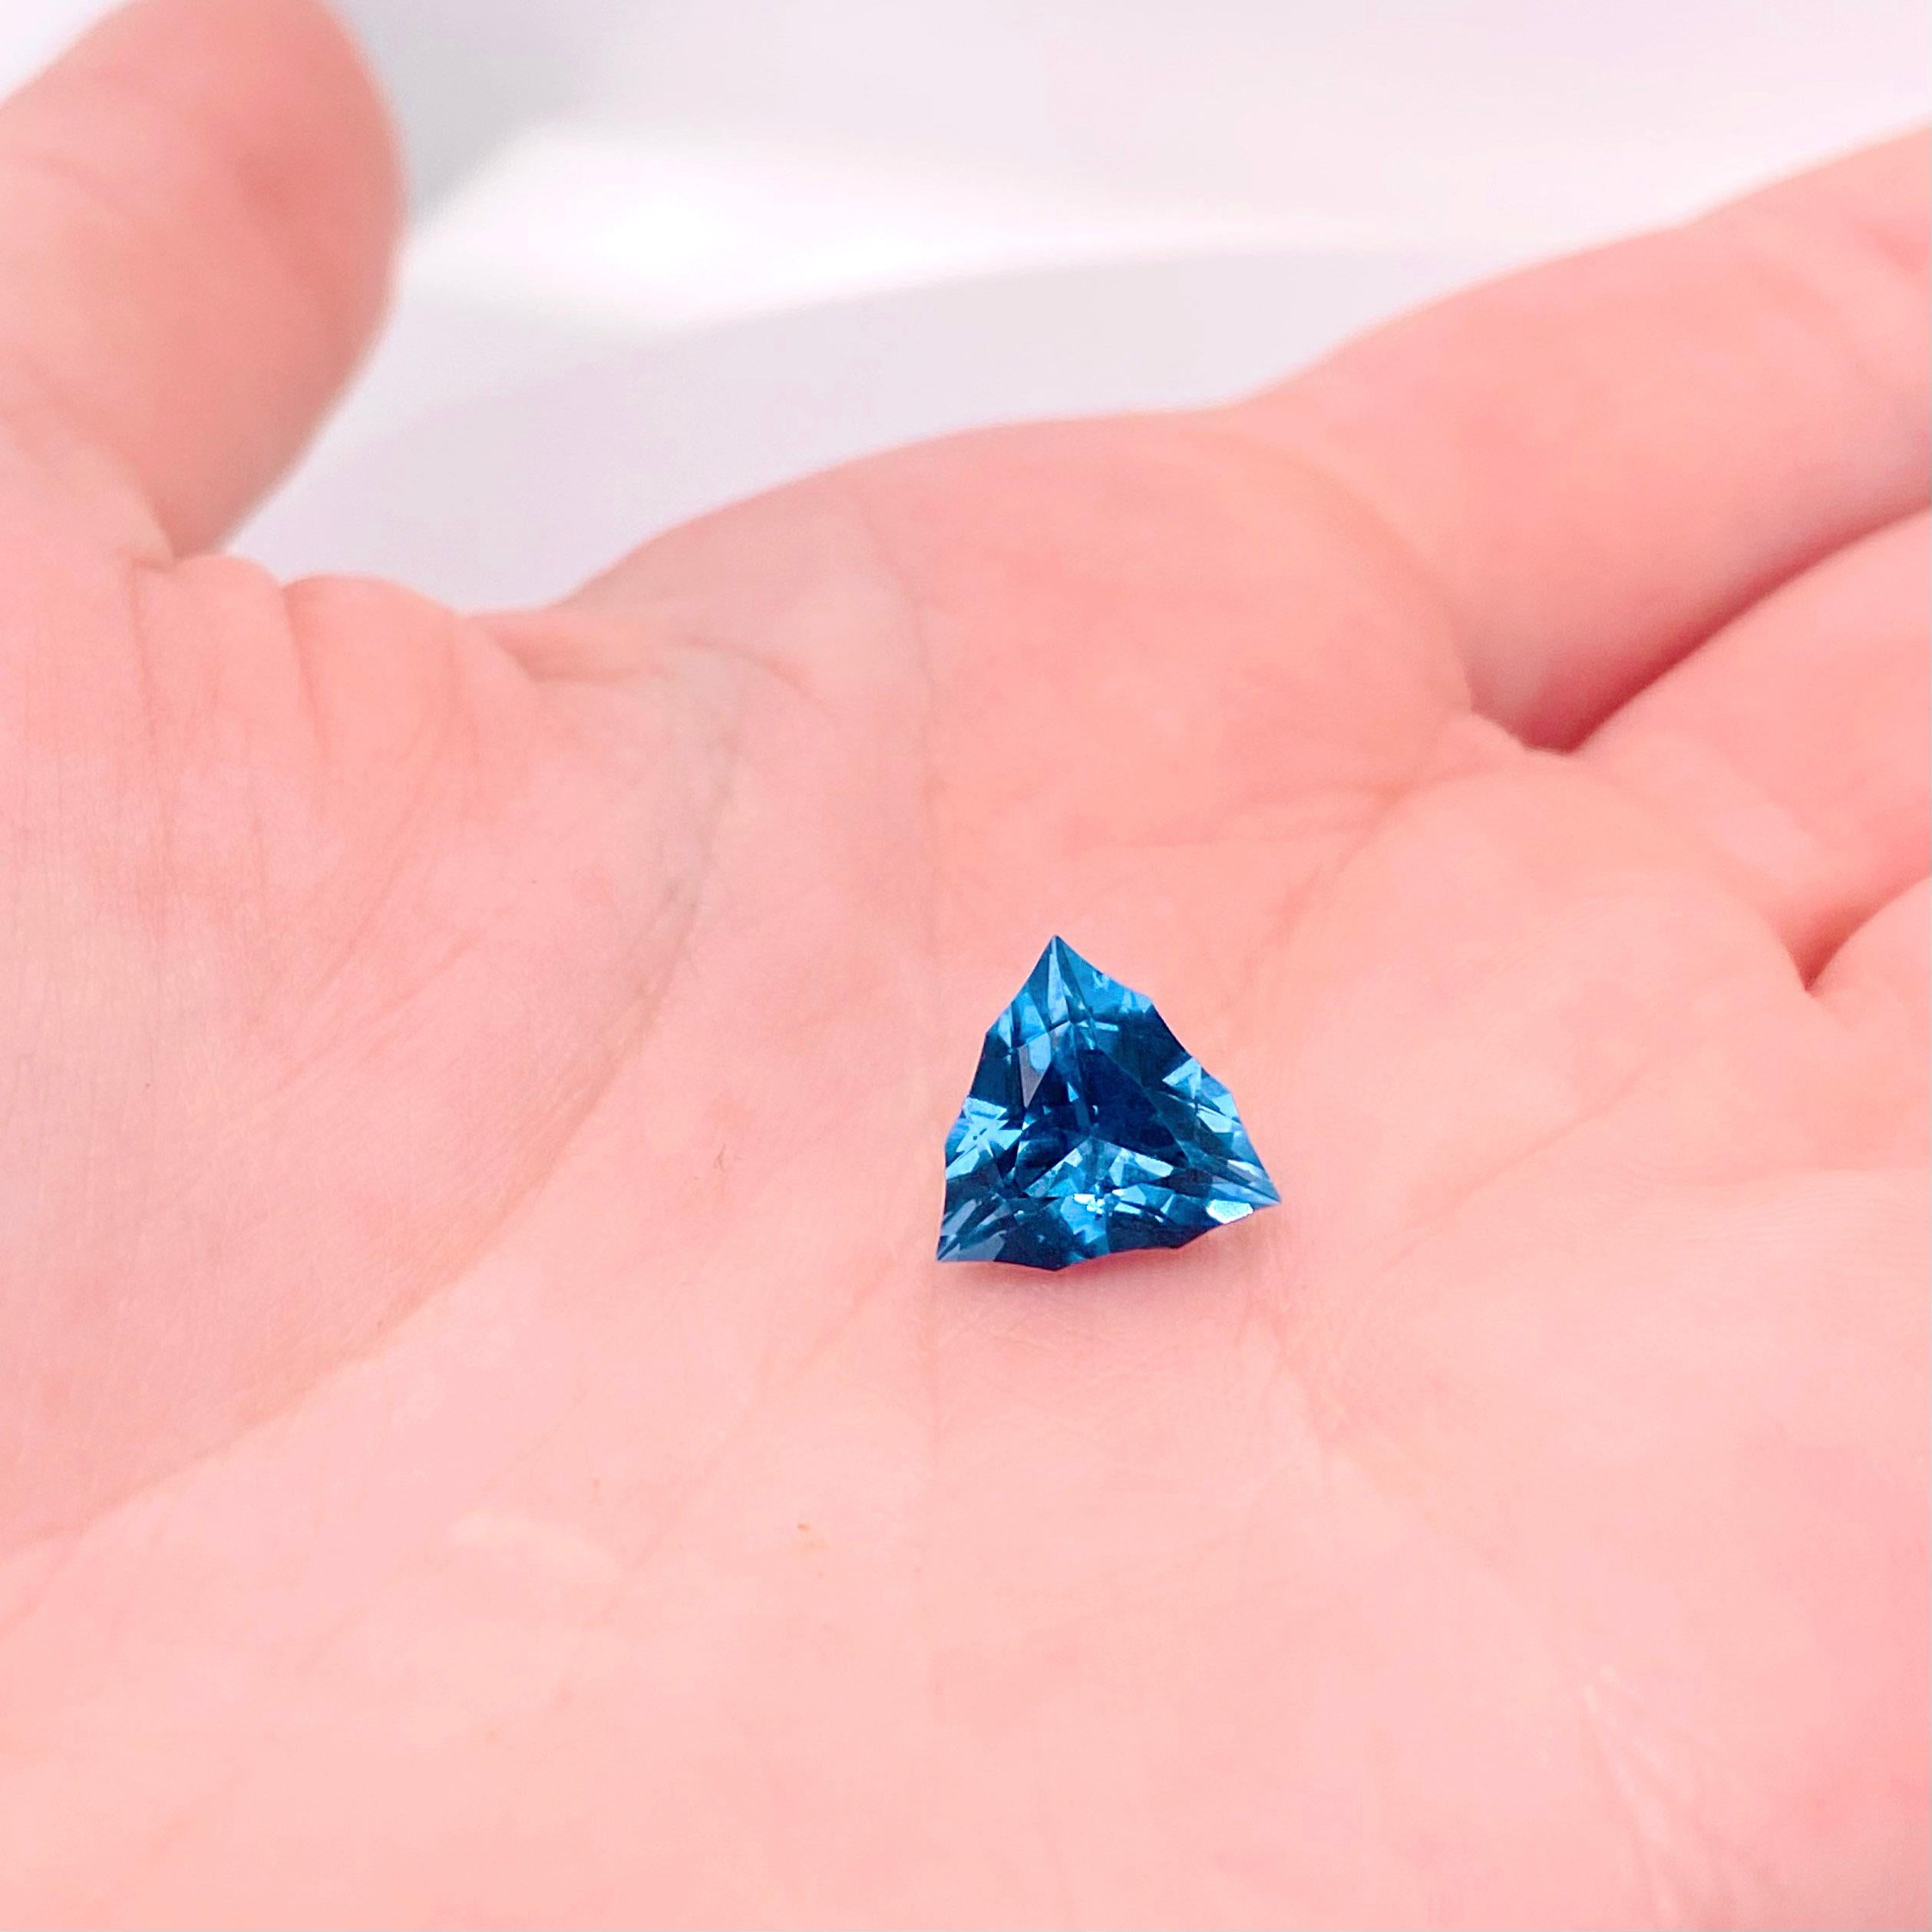 This Brazilian Fantasy Gemstone weighs 3.81 carats and was very carefully cut by a well known cutter in Brazil. The London Blue Topaz is so sleek and has amazing reflections. The color of the topaz is a gorgeous deep, vibrant color and the sleek